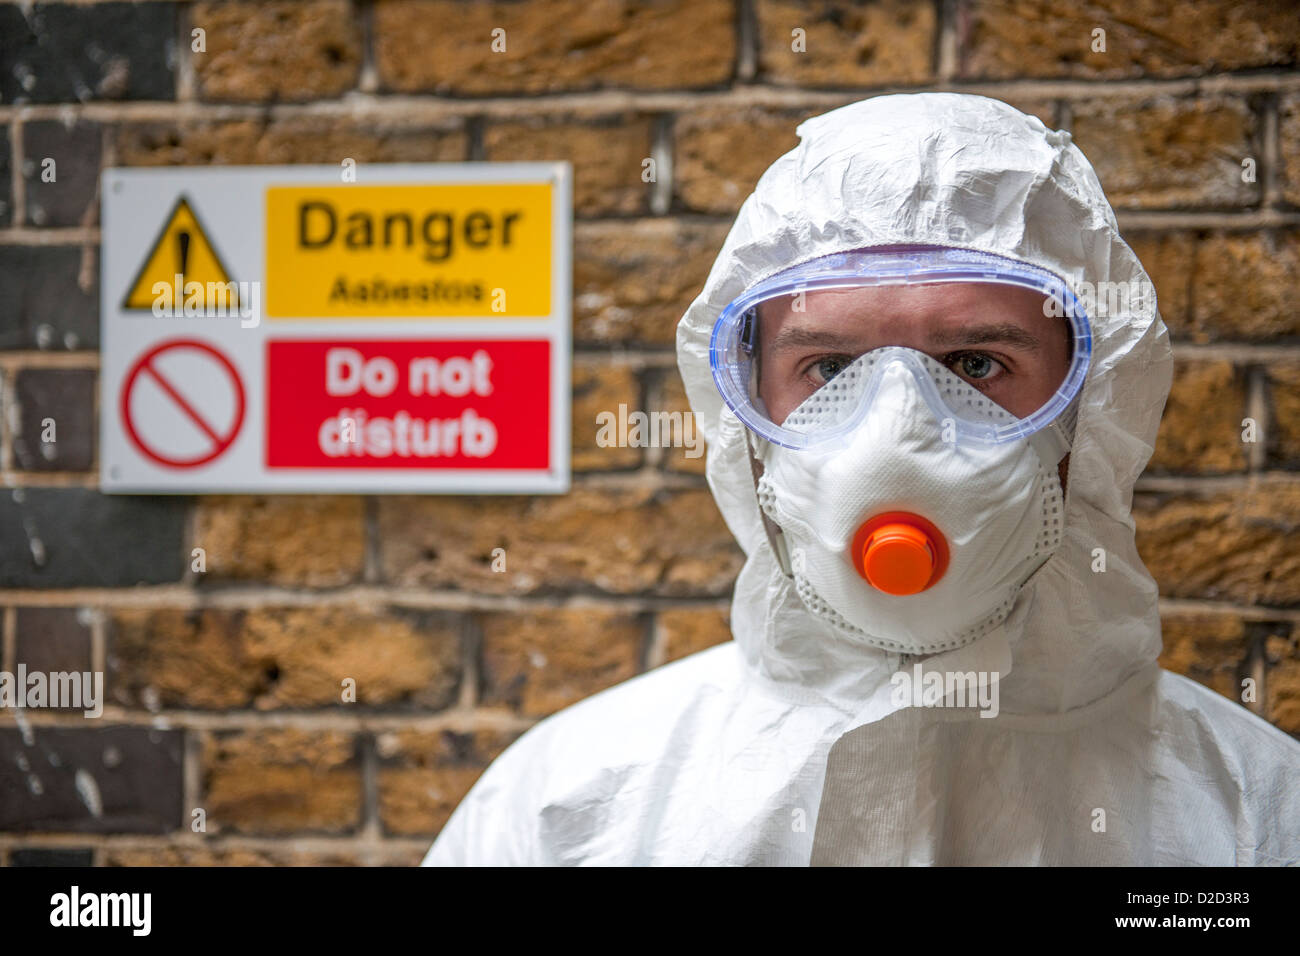 MODEL RELEASED Asbestos protection Worker wearing protective clothing a face mask and safety goggles Stock Photo